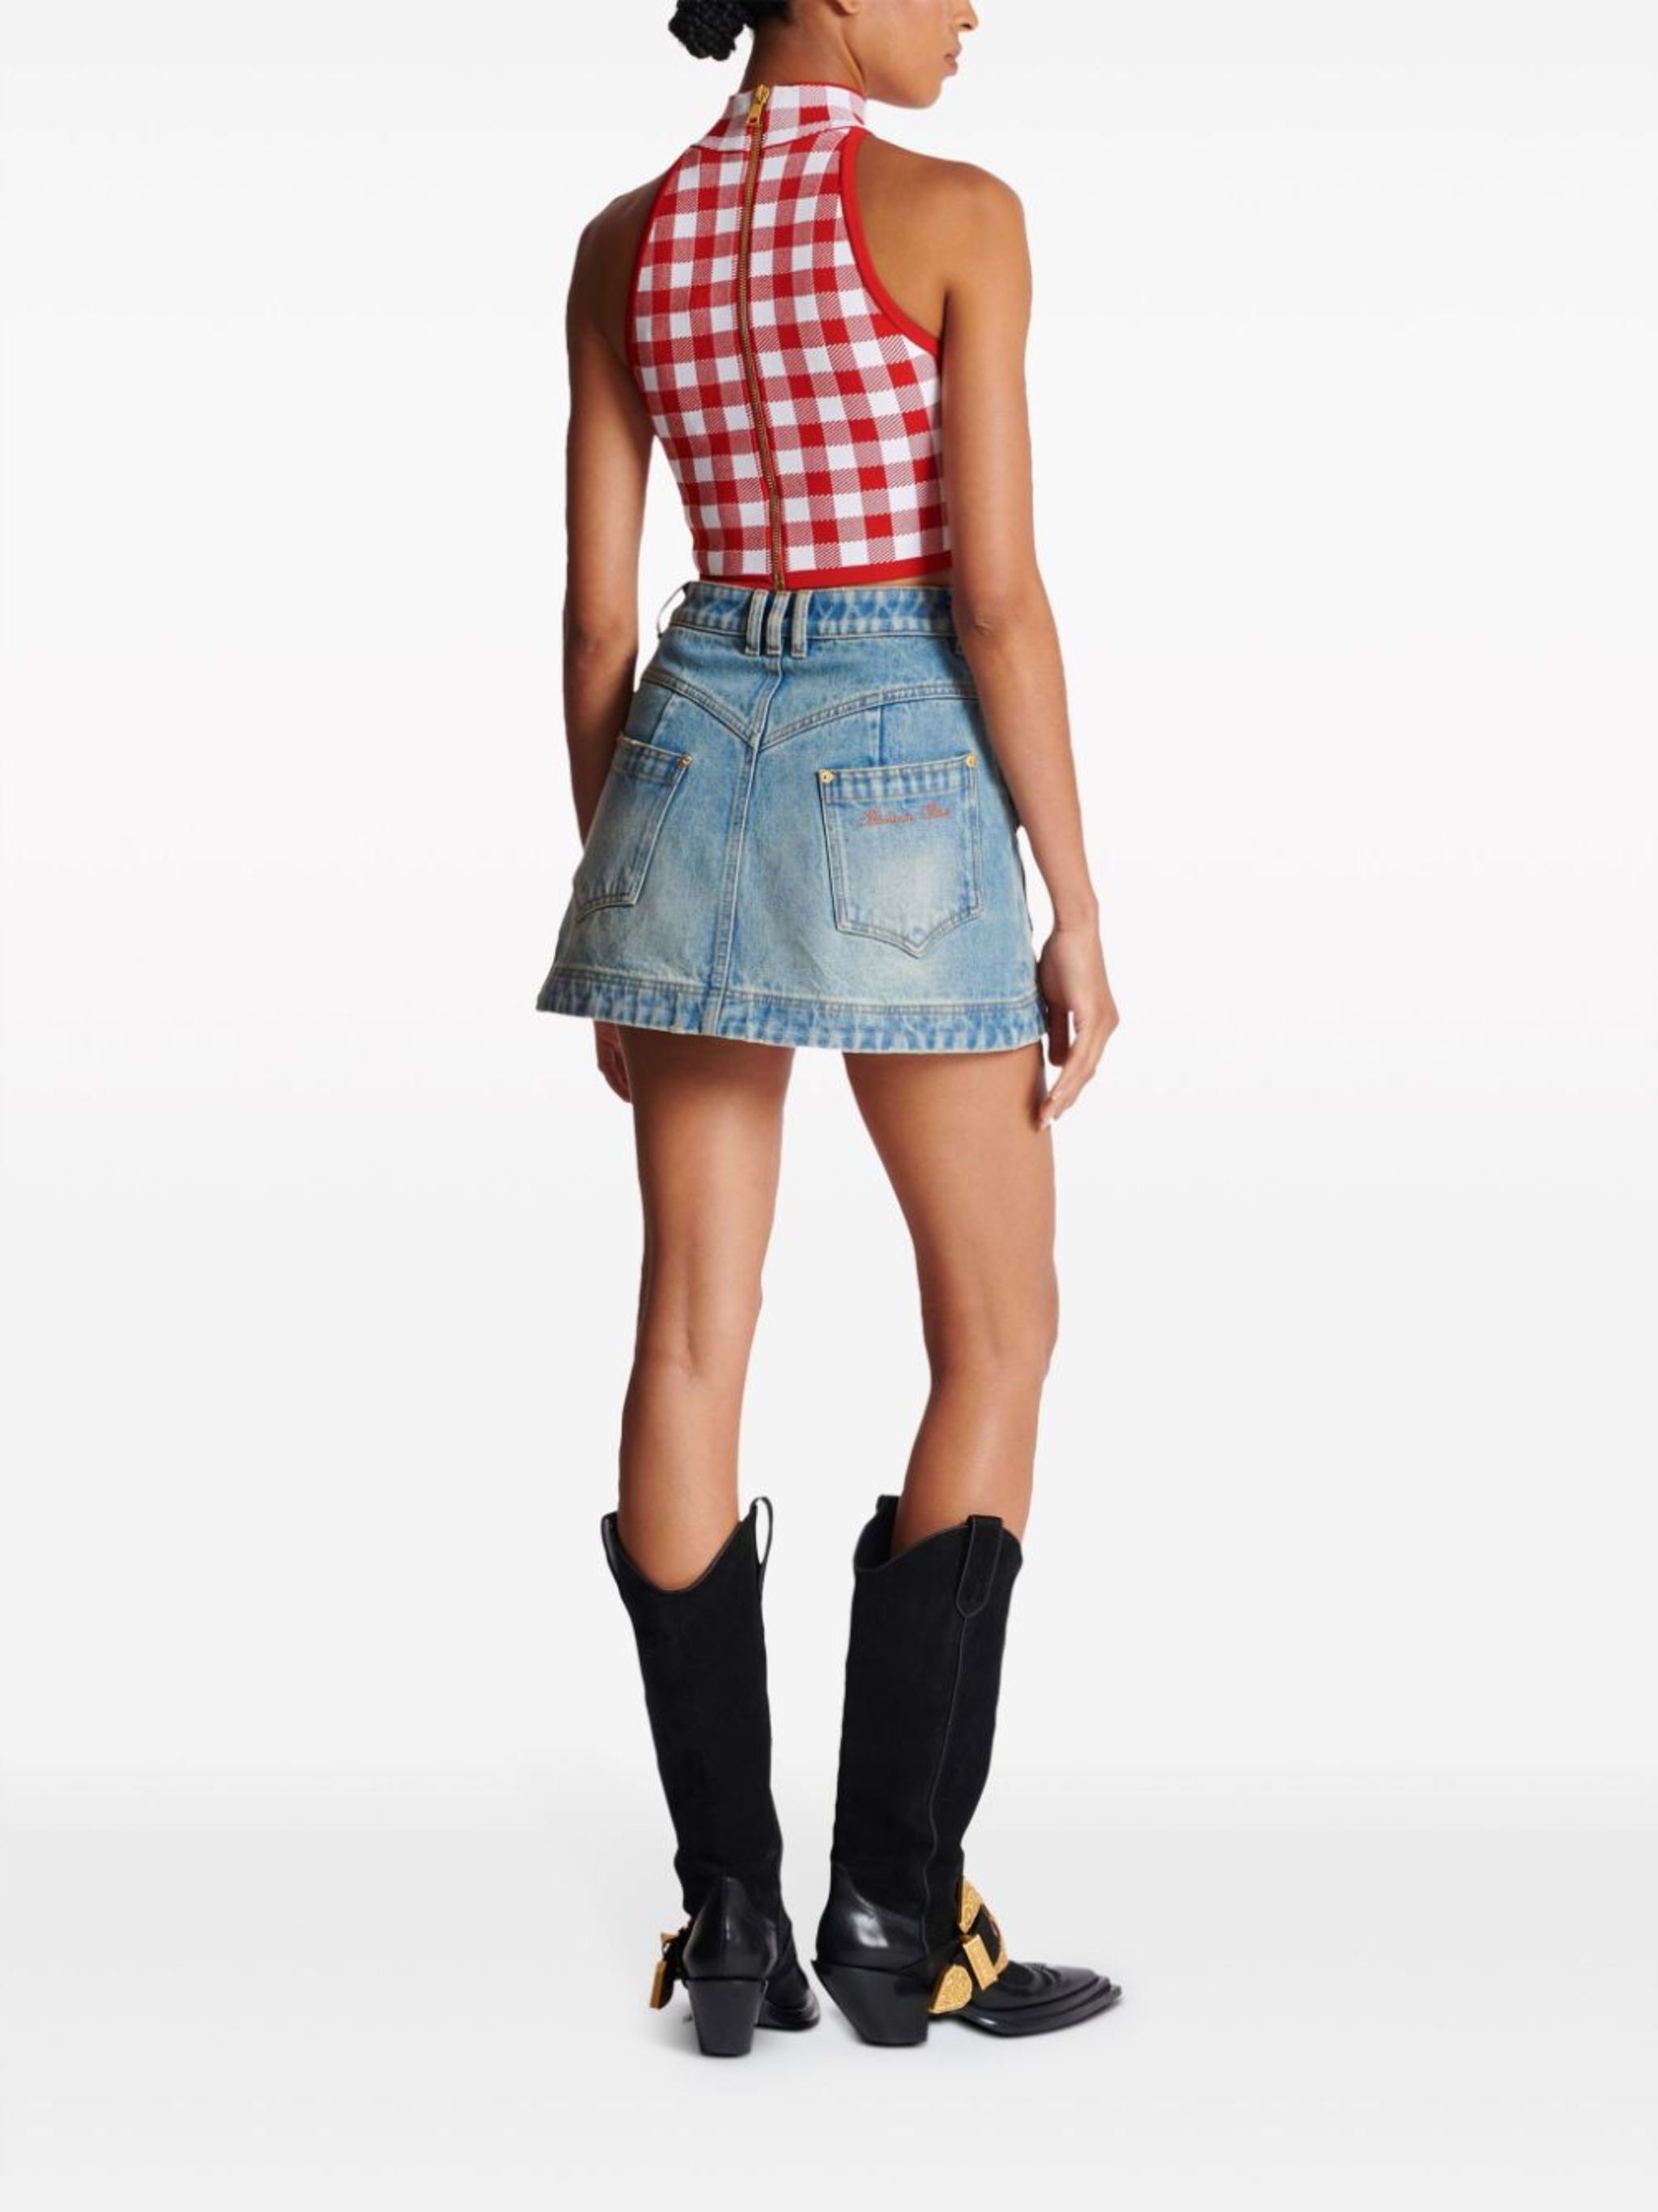 gingham-check pattern zip-up top - 4